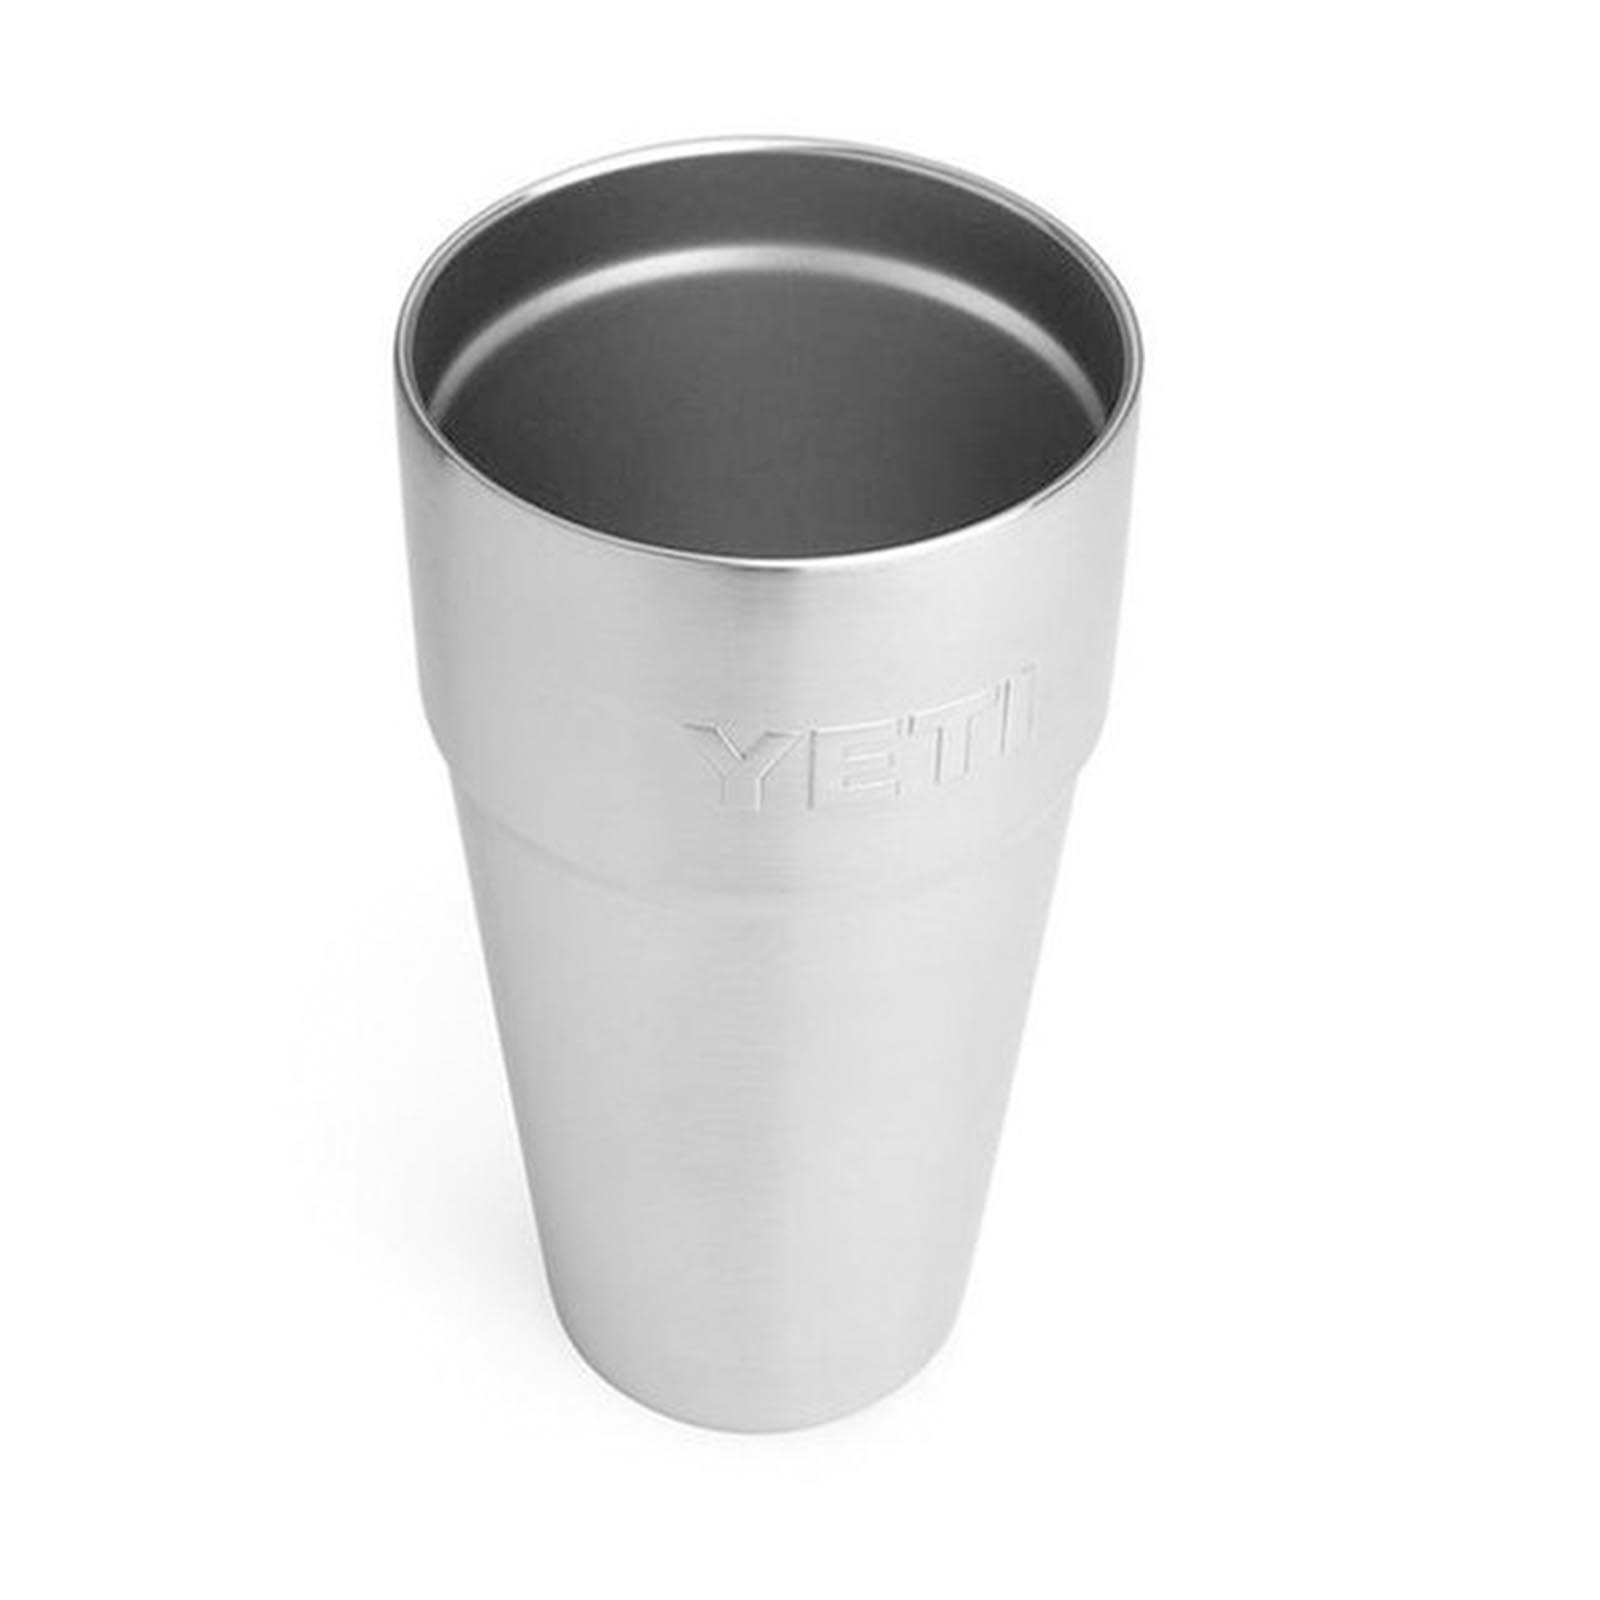  YETI Rambler 8 oz Stackable Cup, Stainless Steel